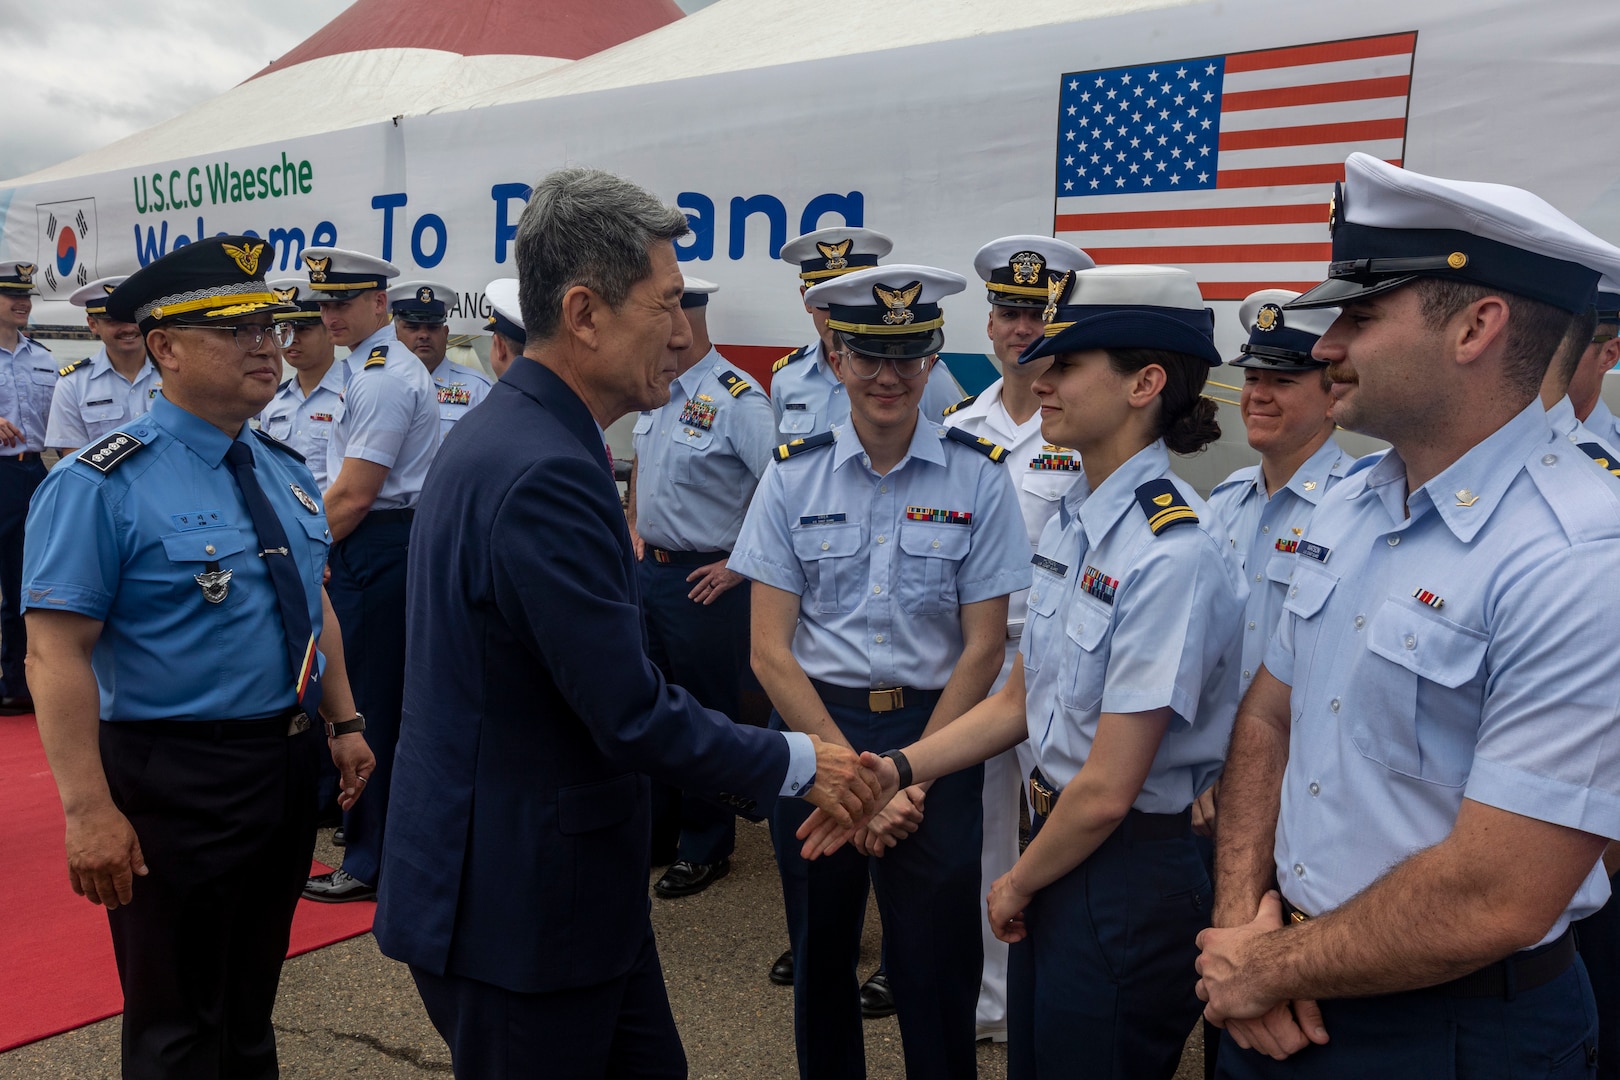 Lee Kang-Deok, the mayor of Pohang, Republic of Korea, shakes hands with U.S. Coast Guardsmen during a welcoming reception in Pohang, Republic of Korea, June 9, 2024. The Waesche’s arrival marked the first visit by a U.S. Coast Guard ship to Pohang, which was marked with an opening ceremony between United States and Korea Coast Guardsmen. 7th Fleet’s principal surface force. U.S. Coast Guard missions in the Indo-Pacific focus on issues directly supporting and advancing our regional partners’ efforts to protect fish stocks, ensure safety of life at sea, support environmental response, and provide disaster relief. (U.S. Marine Corps photo by Cpl. Elijah Murphy)